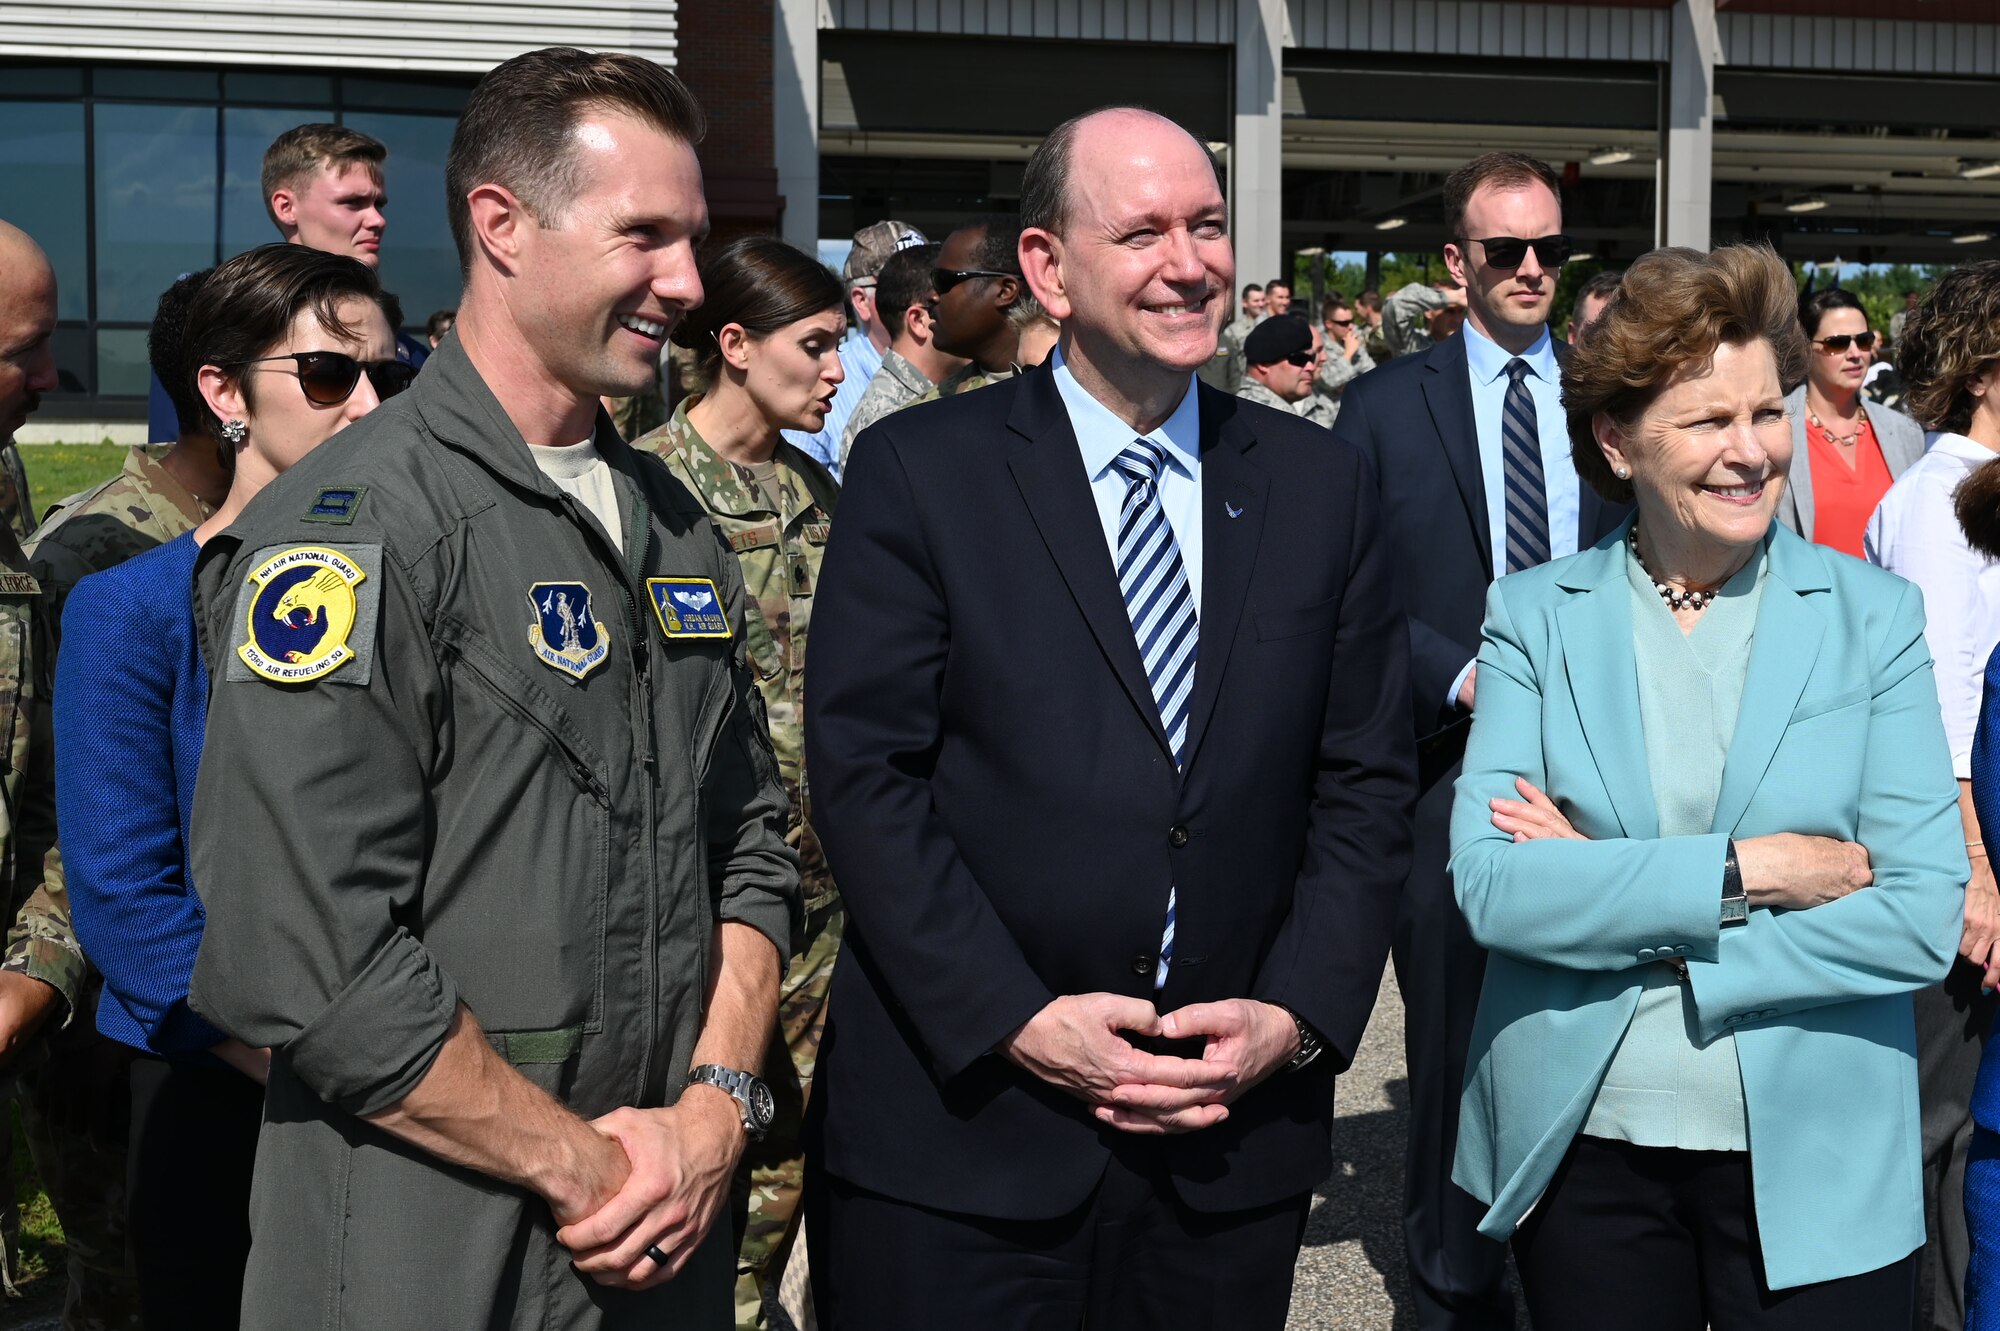 Matthew Donovan, the acting secretary of the Air Force, is flanked by Capt. Jordan Gauvin, 133rd Air Refueling Squadron, and U.S. Sen. Jeanne Shaeen during a KC-46A air refueling tanker welcoming event at Pease Air National Guard Base, Aug. 8, 2019. The plane's arrival marks a new era of refueling at Pease, which was the first National Guard base to receive the new aircraft.  (U.S. Air National Guard photo by Staff Sgt. Charles Johnston)